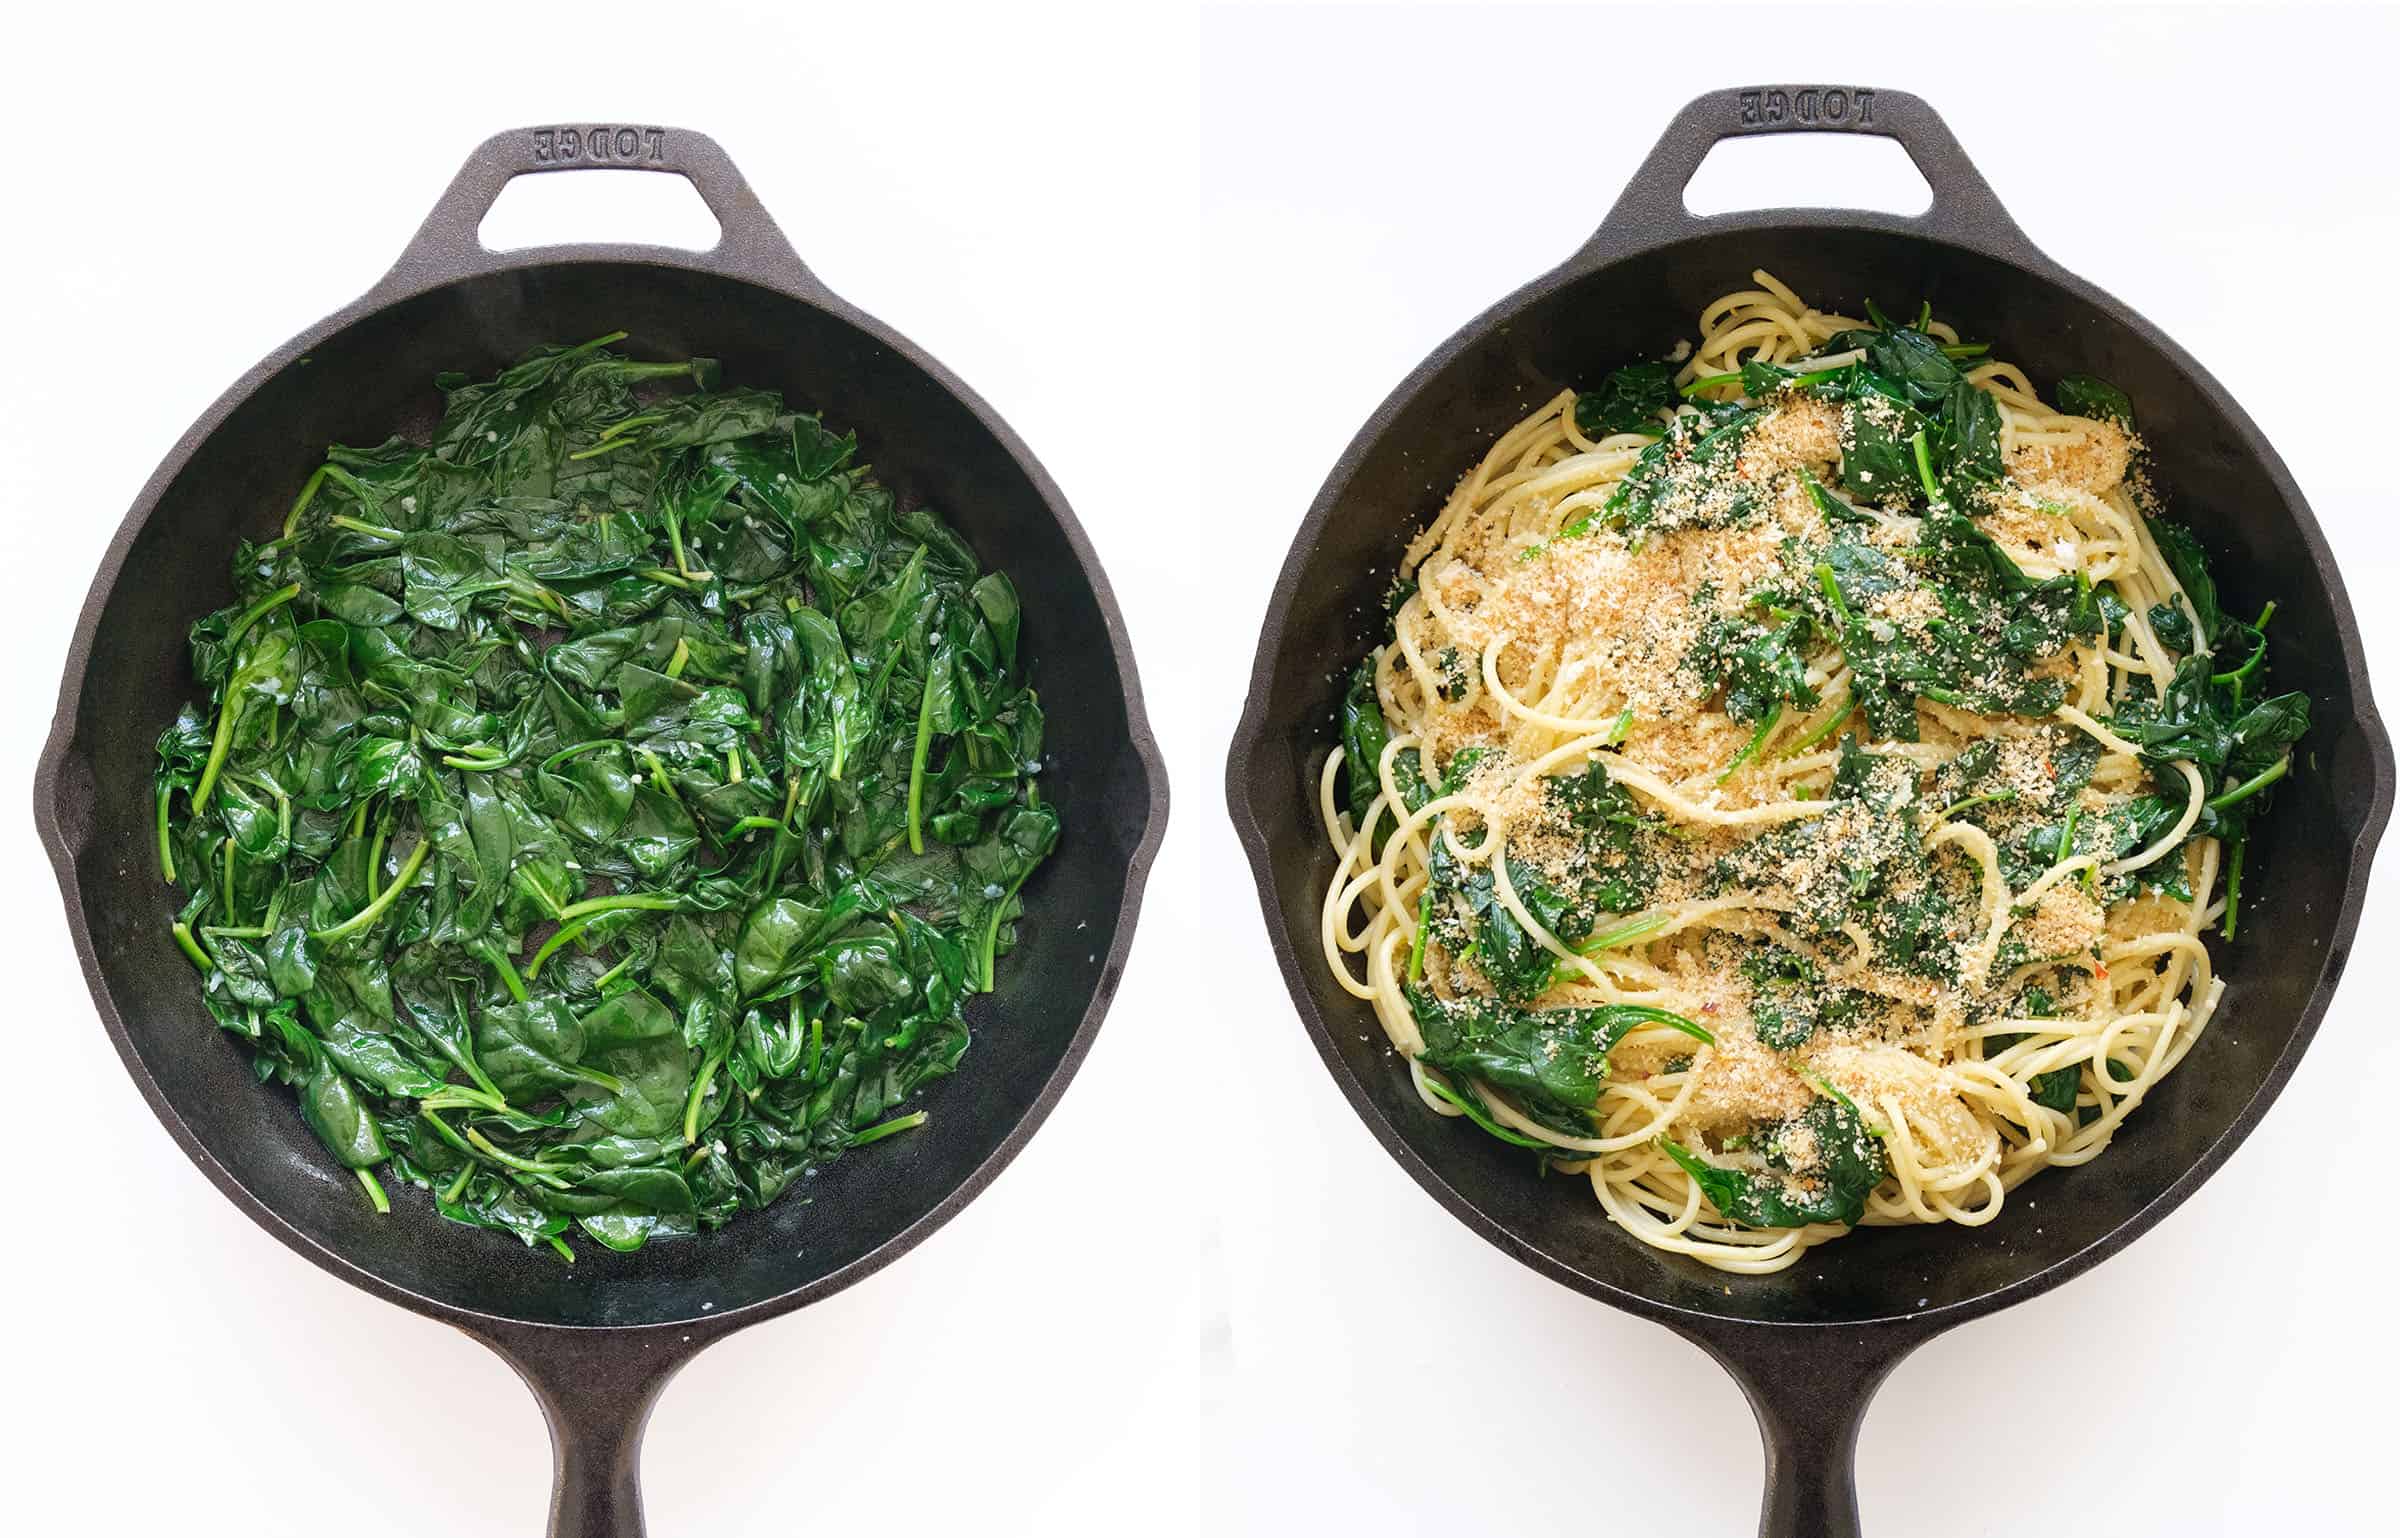 Top view of a cast iron skillet full of spinach and spaghetti.